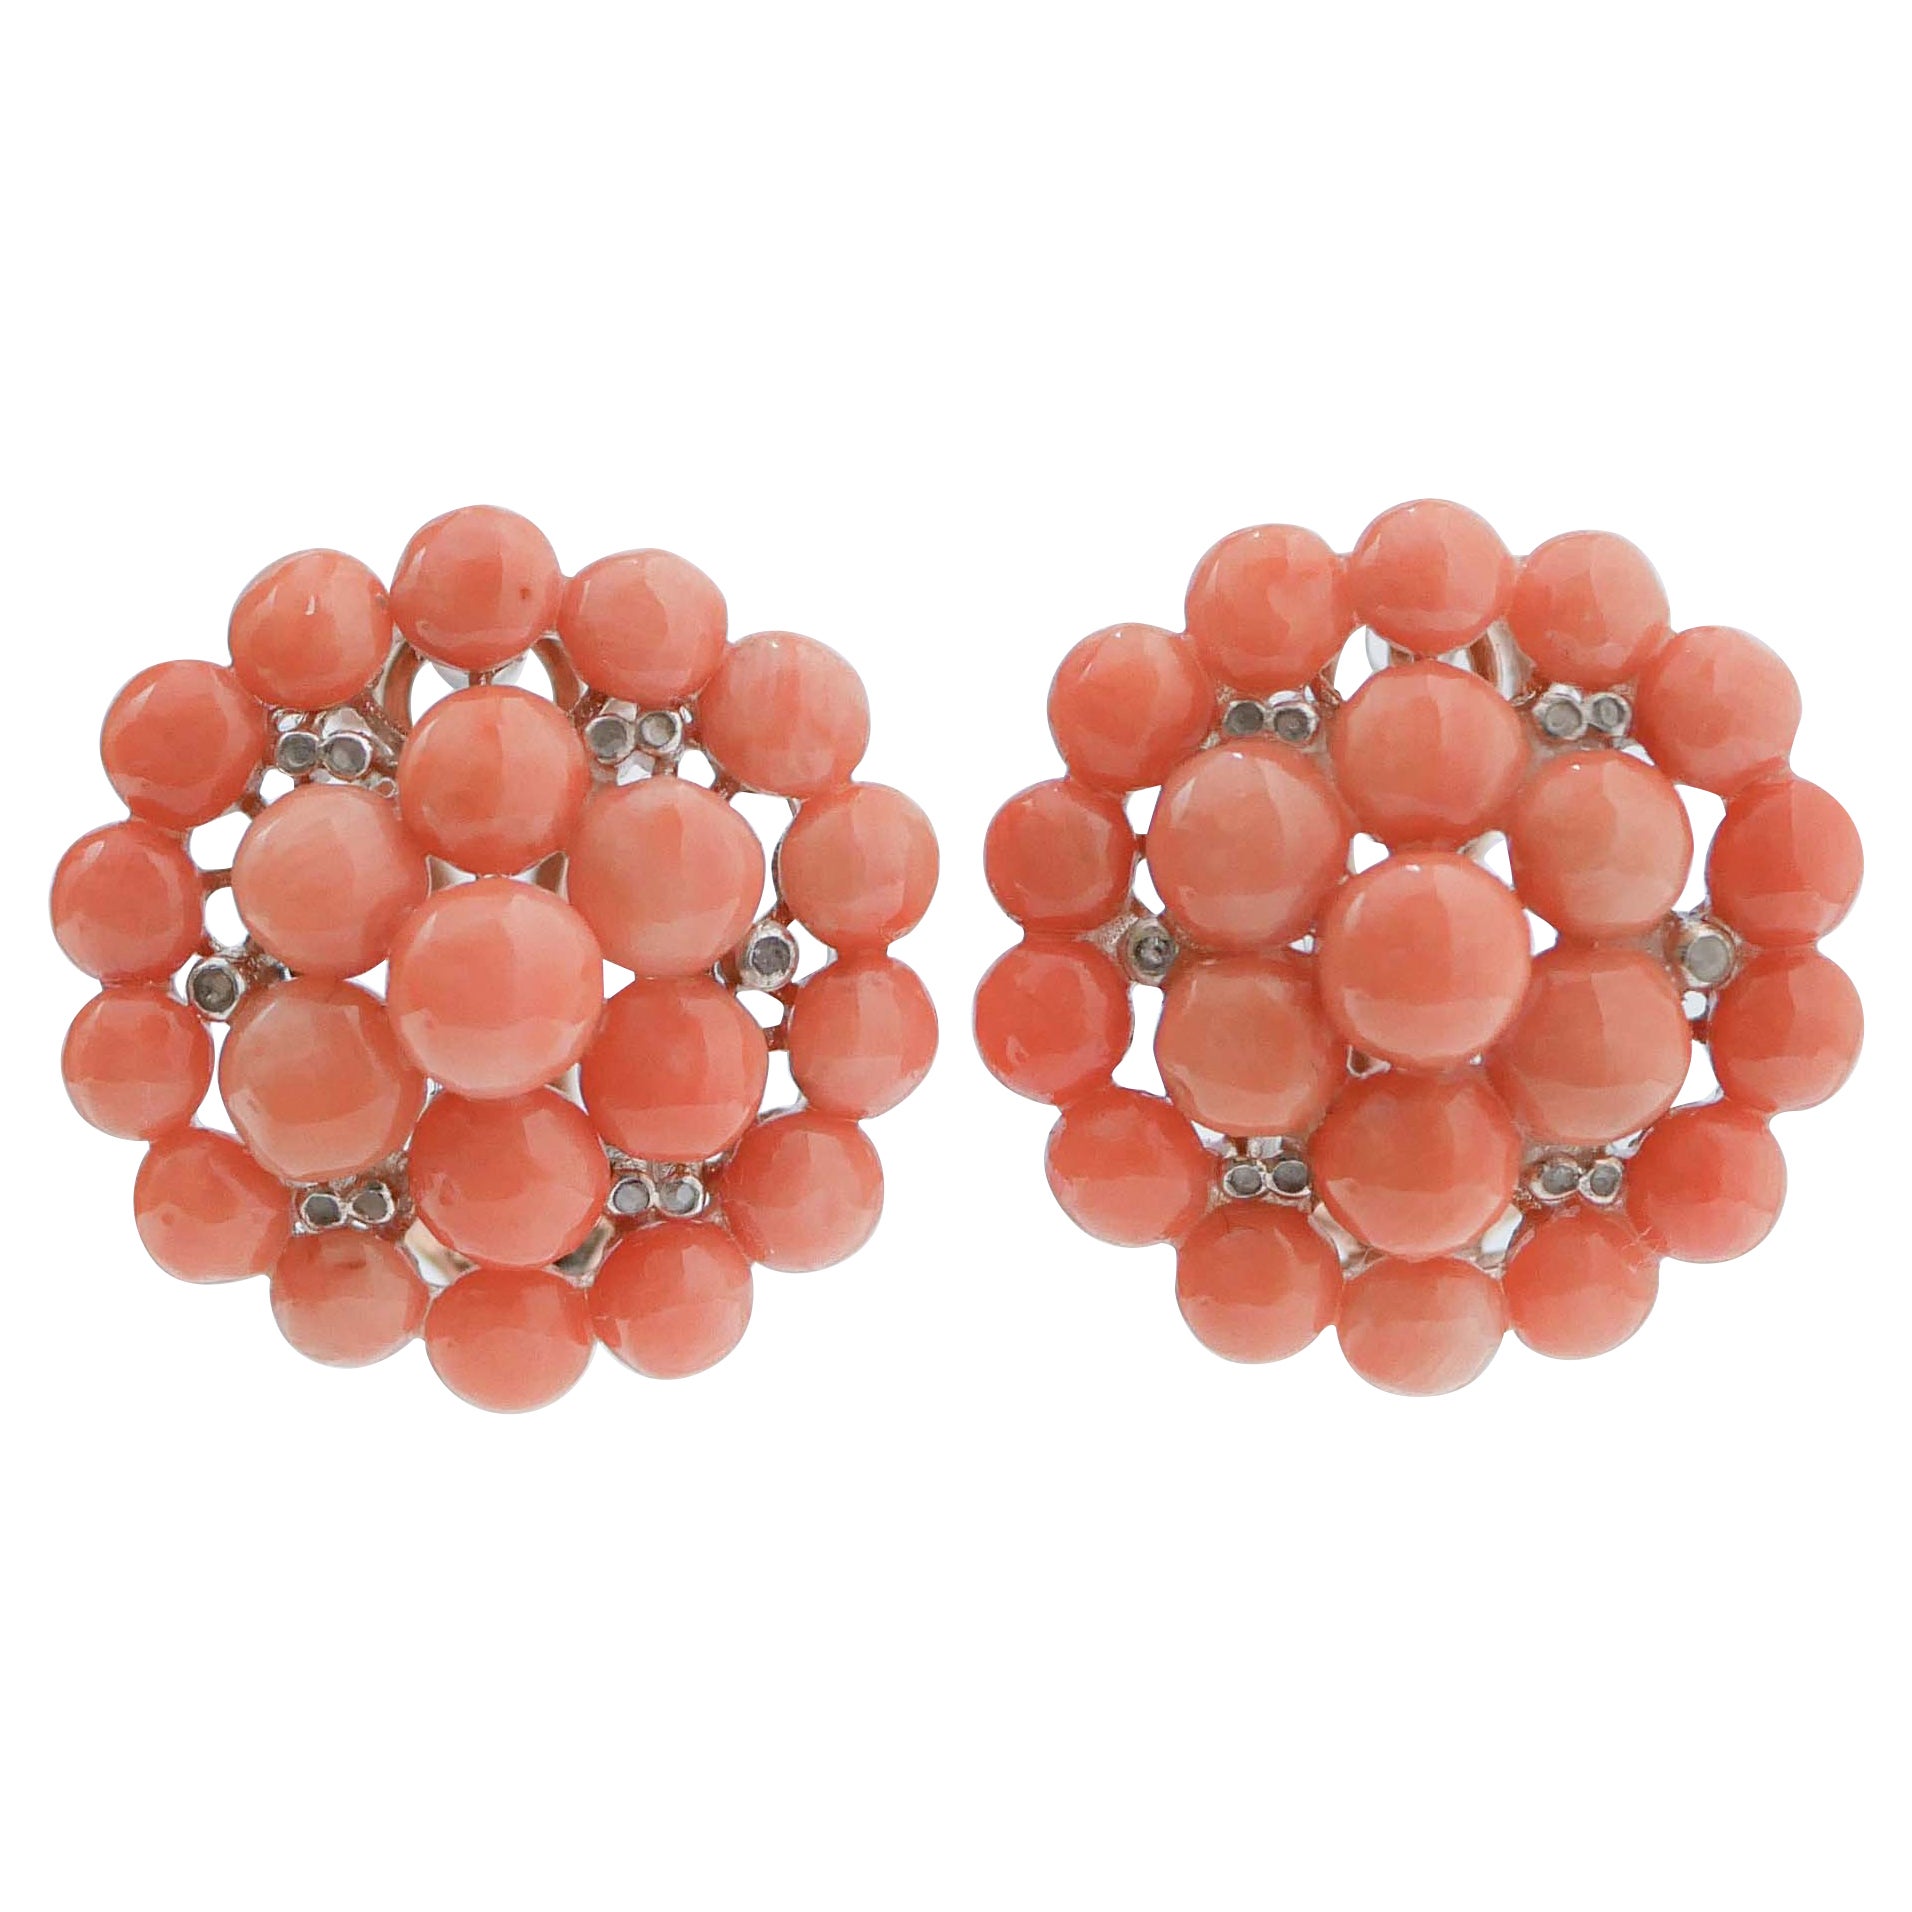 Coral, Diamonds, Rose Gold and Silver Earrings. For Sale